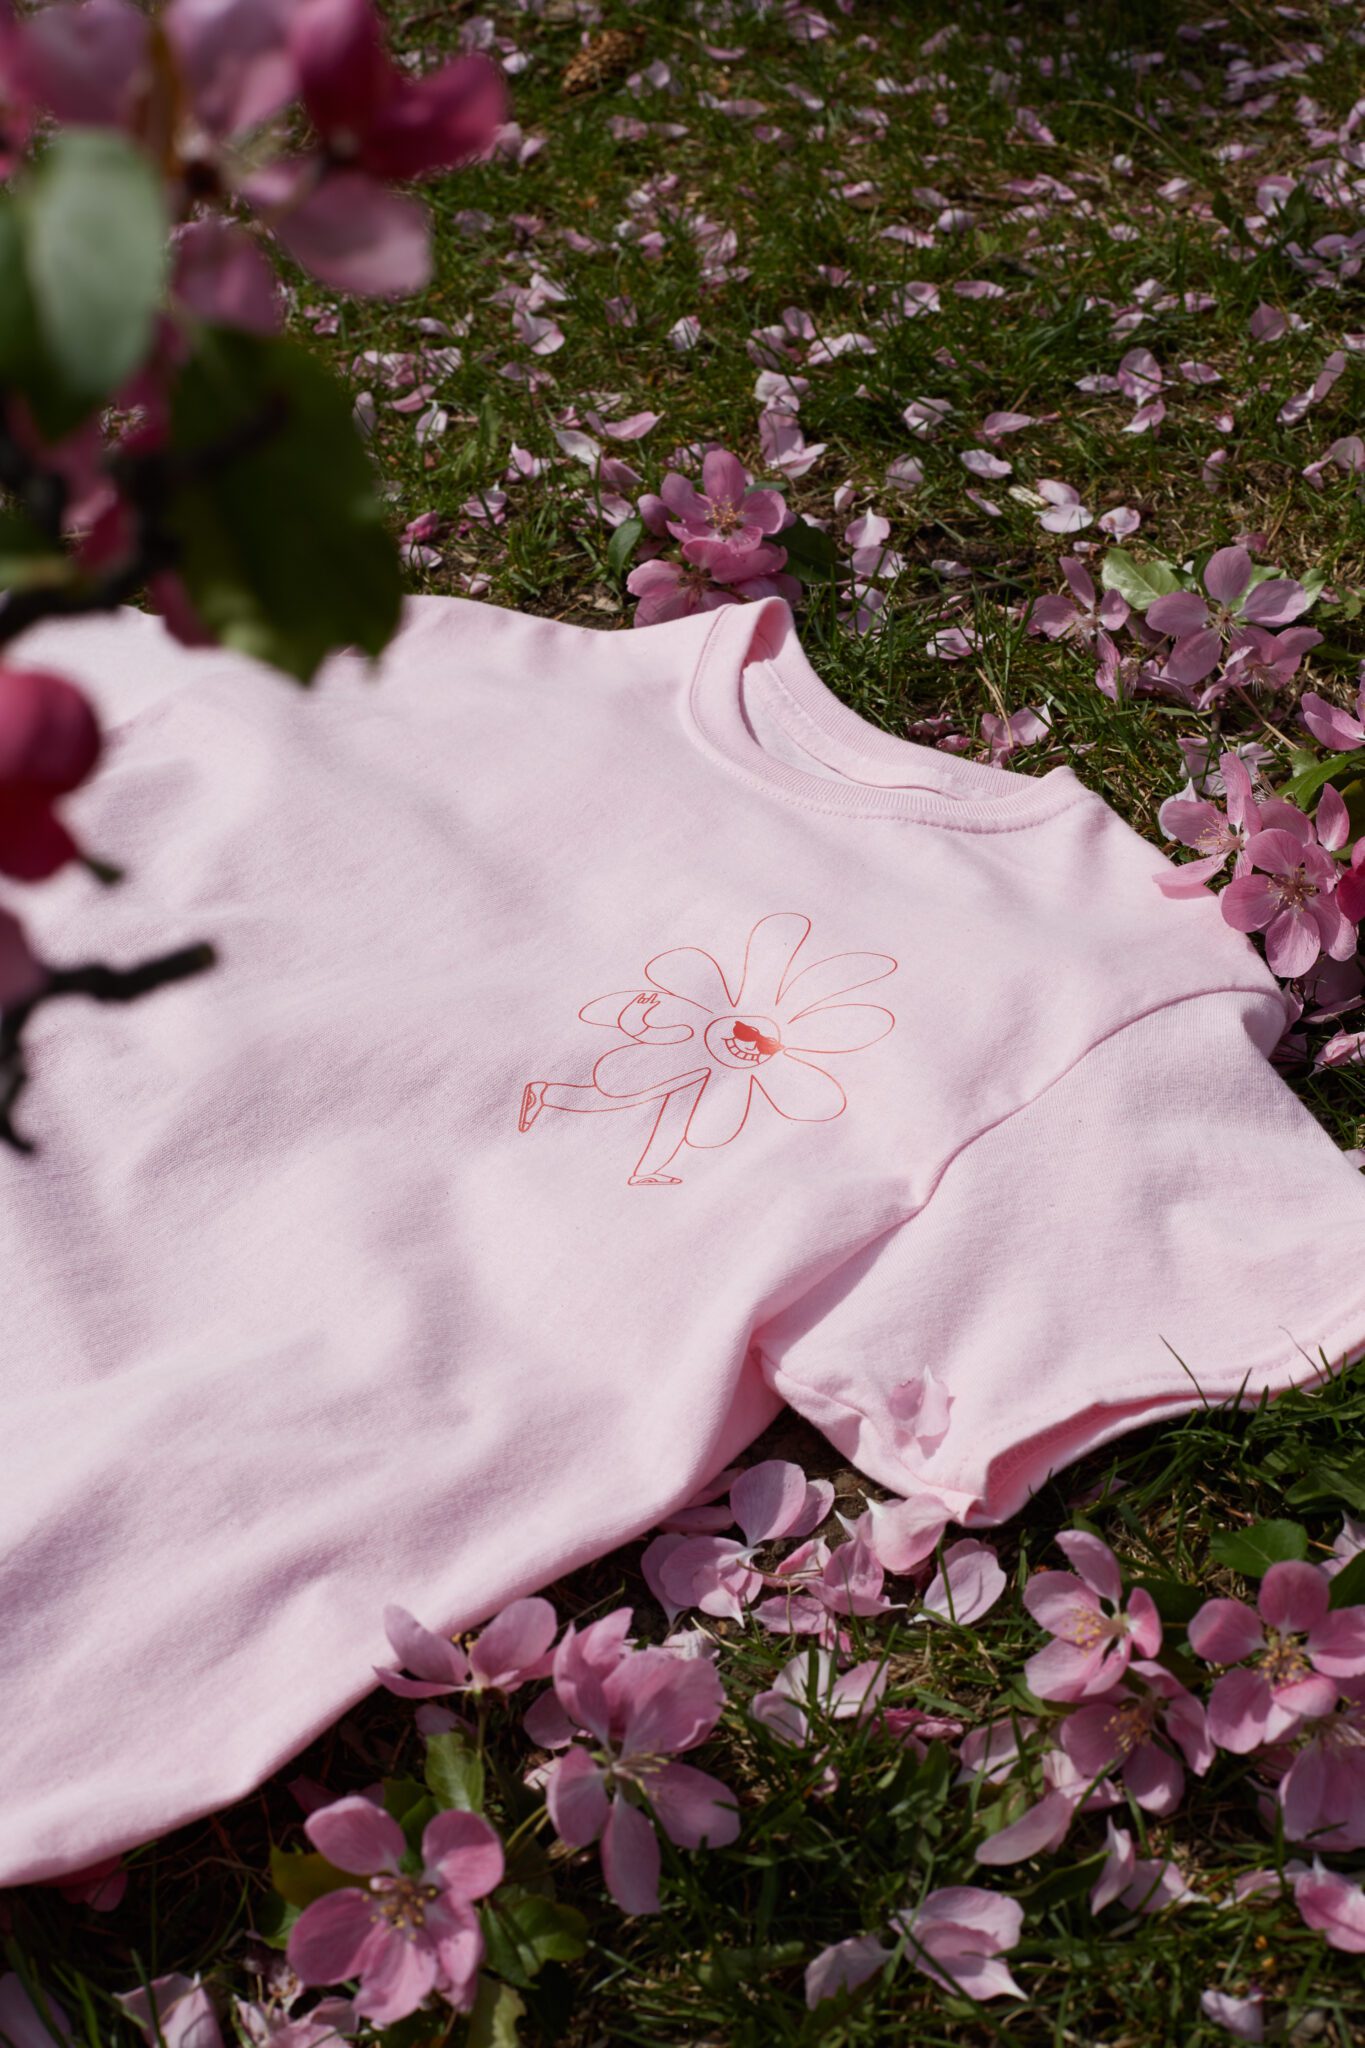 FEQ pink t-shirt with a pink flower doodled on the upper right side of the t-shirt. The shirt is on top of a field of pink petals.